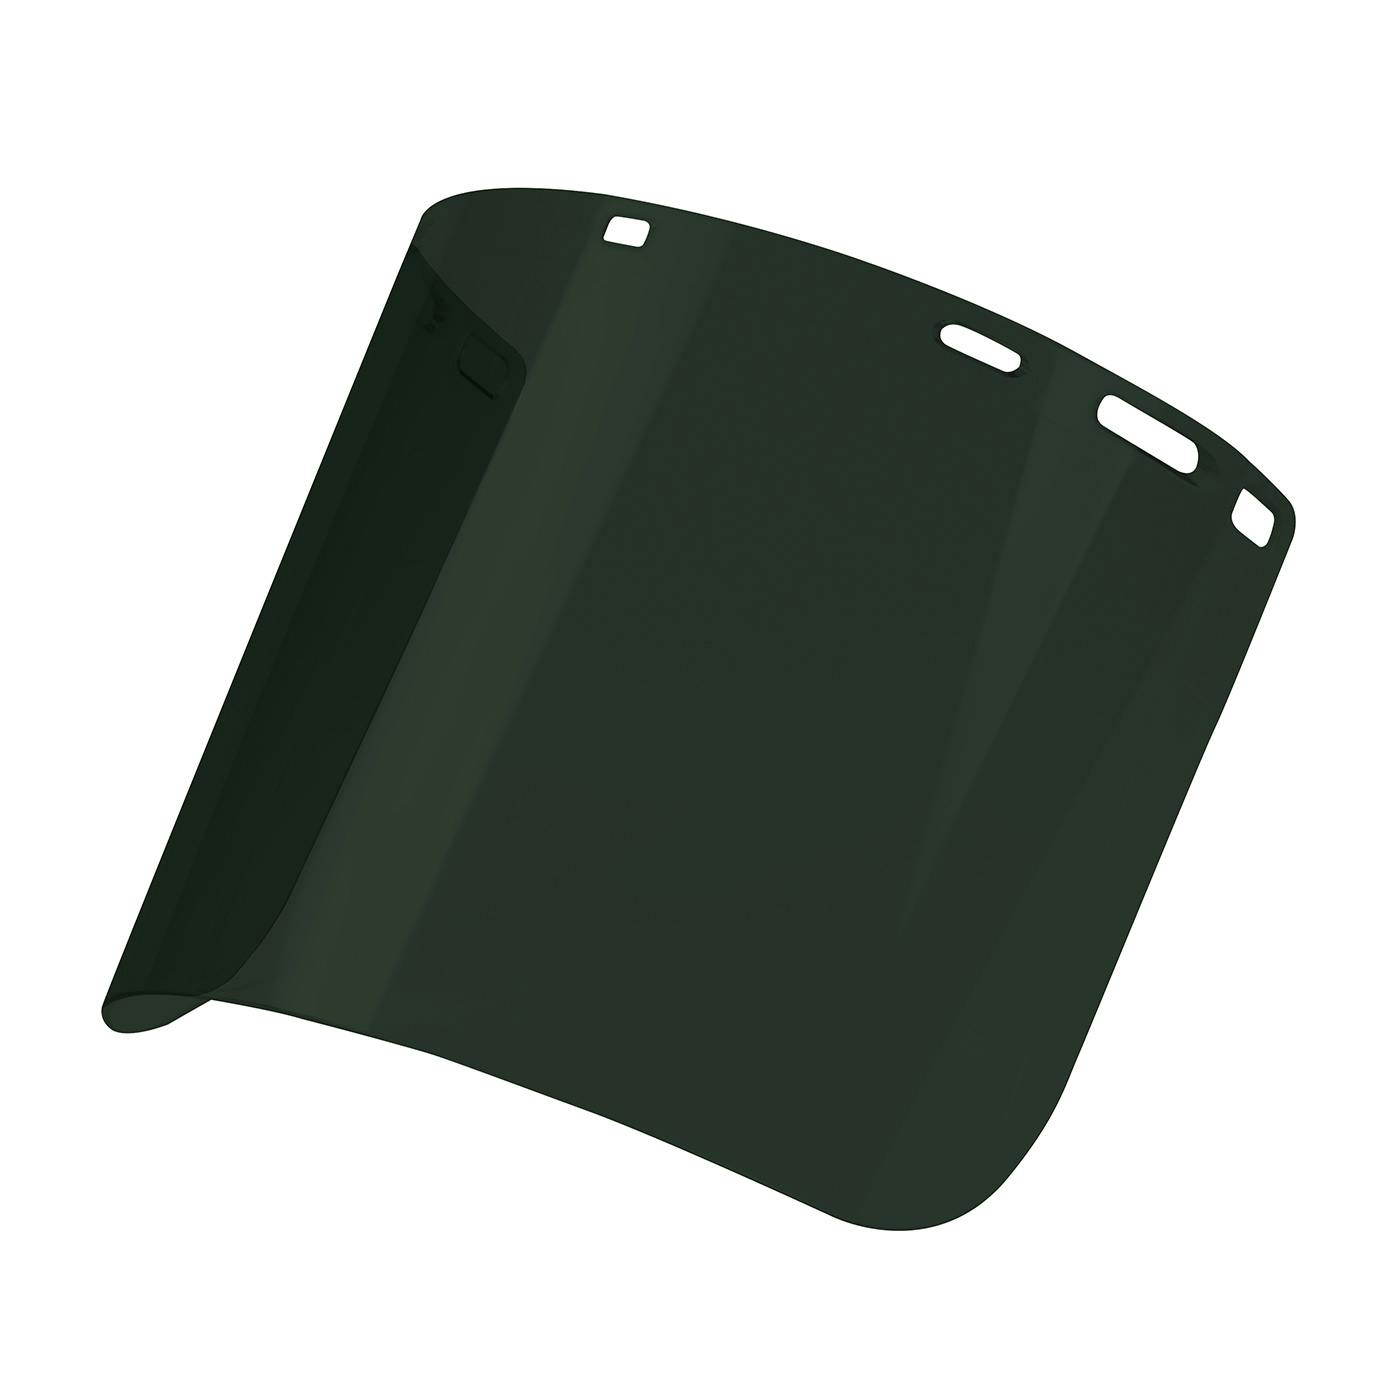 Uncoated Polycarbonate Safety Visor - IR 5.0, Green (251-01-7315) - OS_0